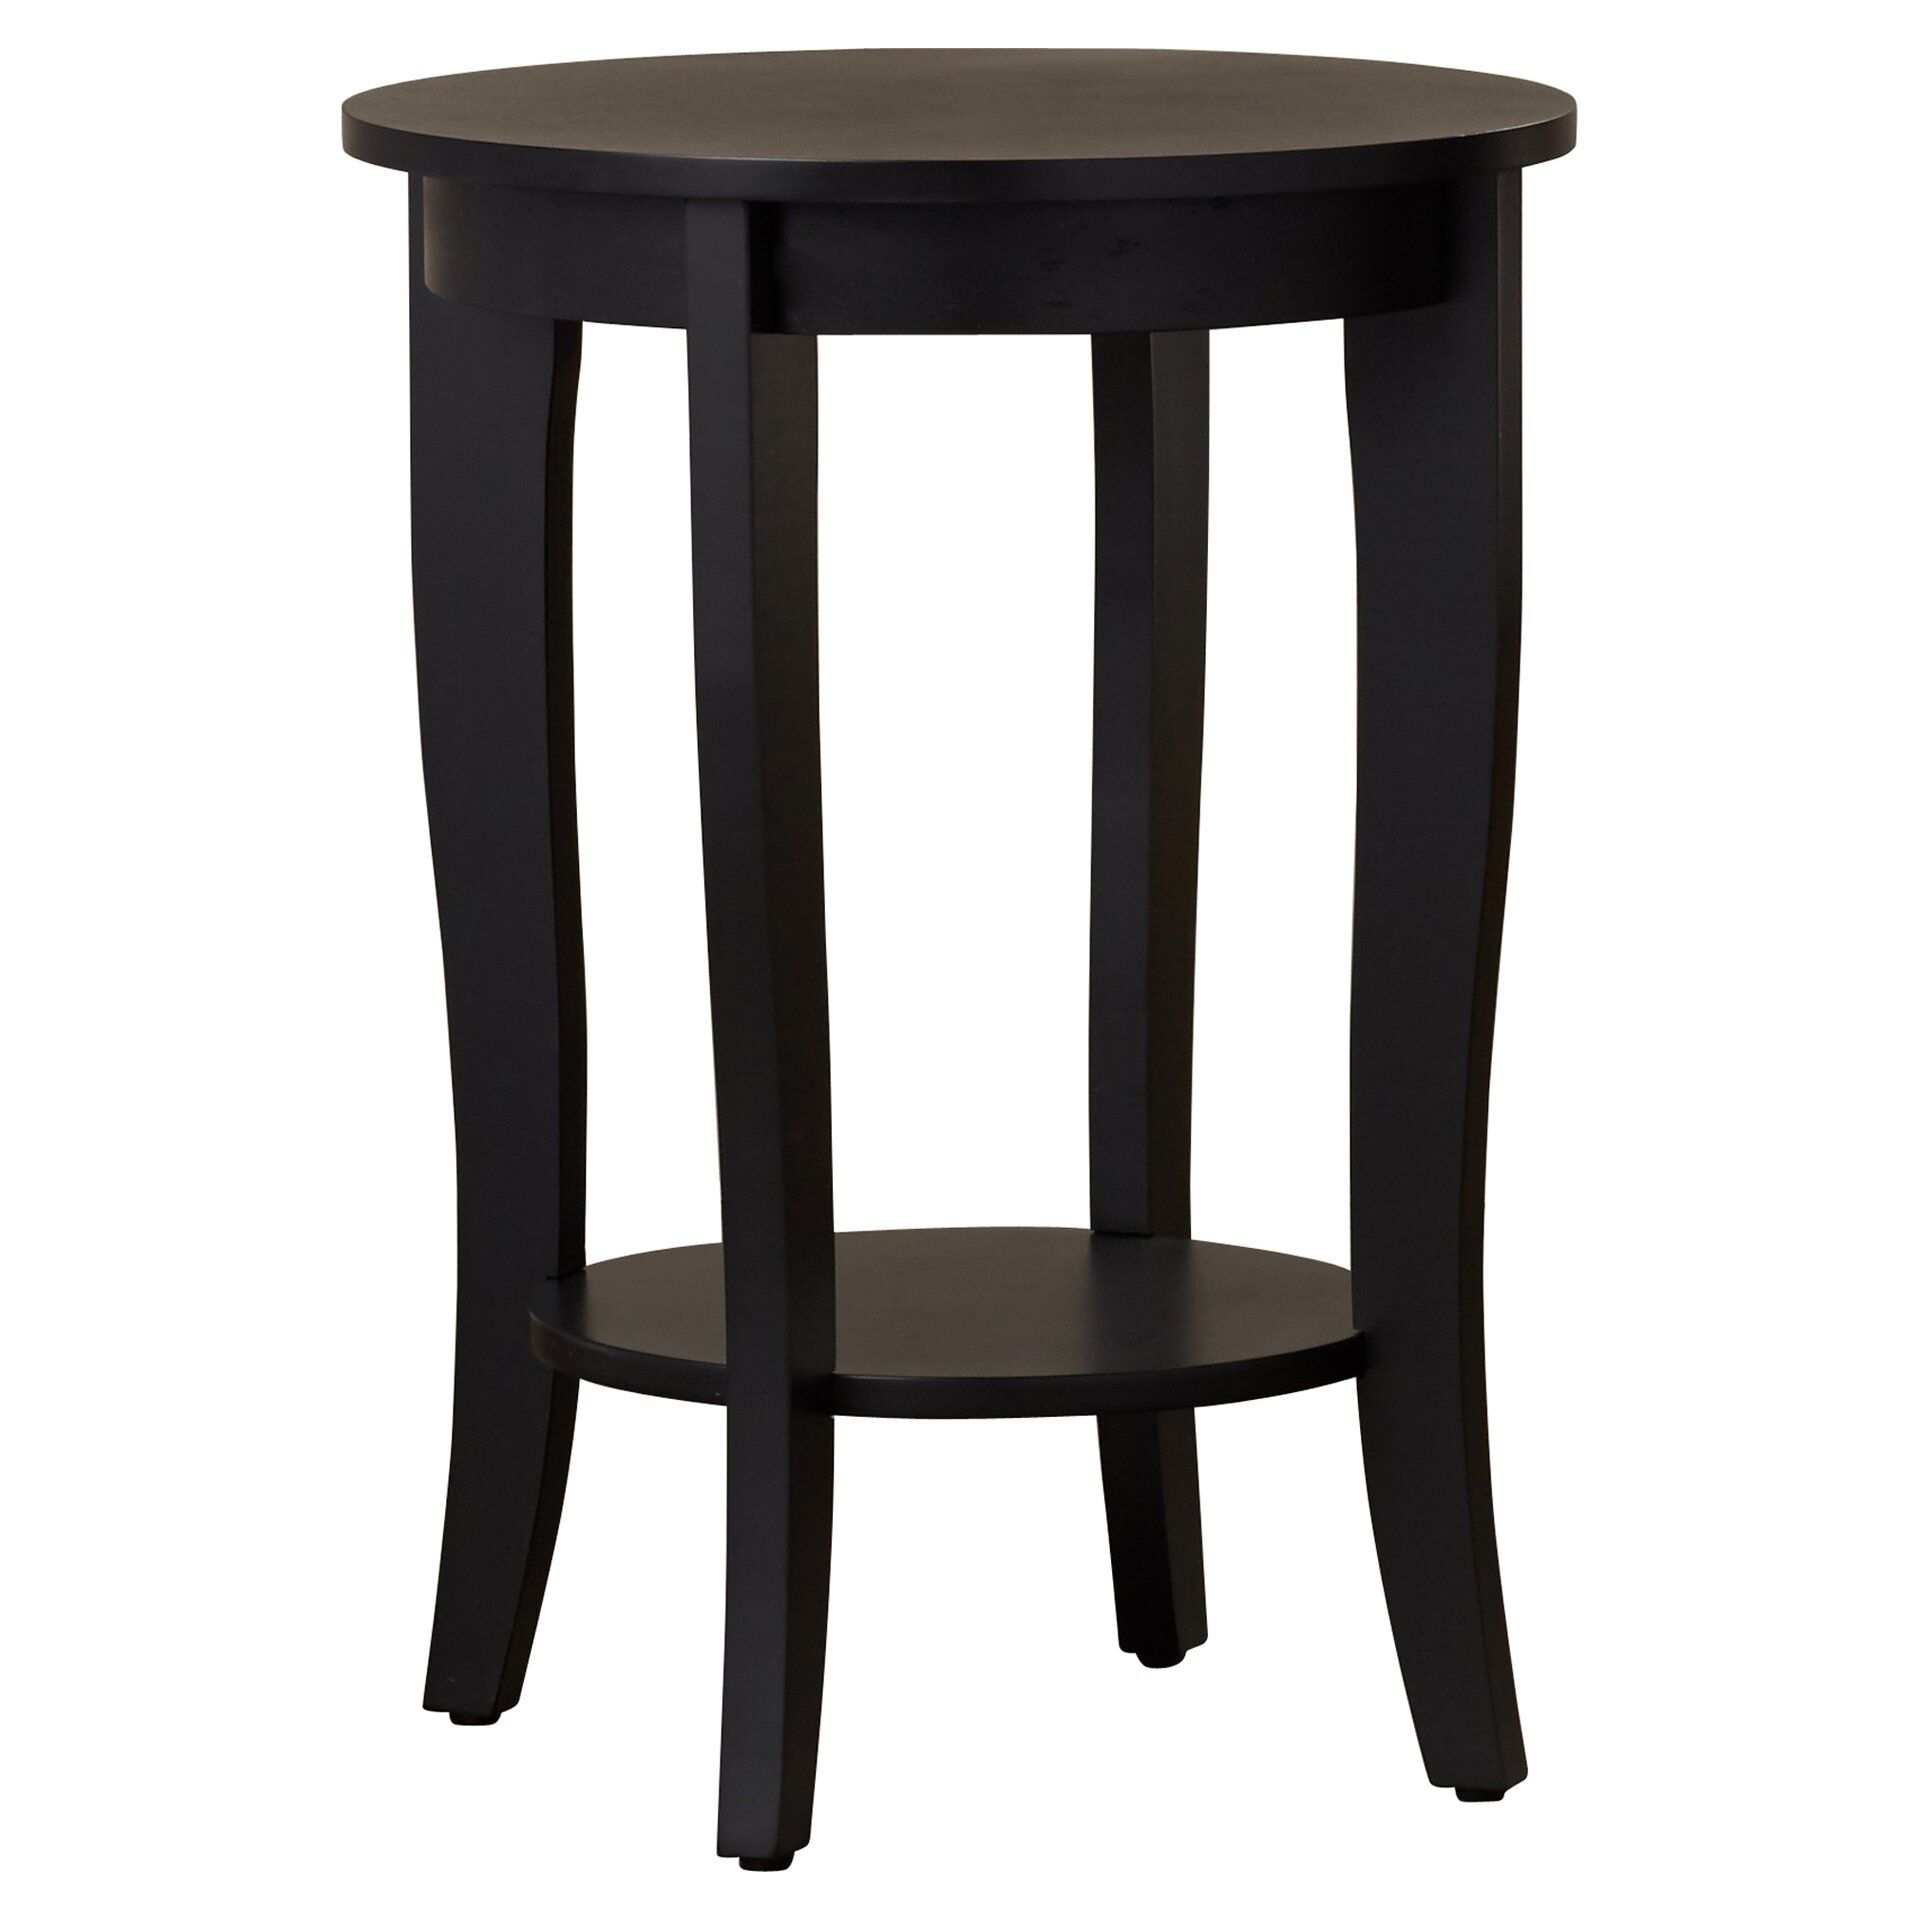 Convenience Concepts American Heritage Round Table & Reviews | Wayfair For American Heritage Round Coffee Tables (Gallery 6 of 20)